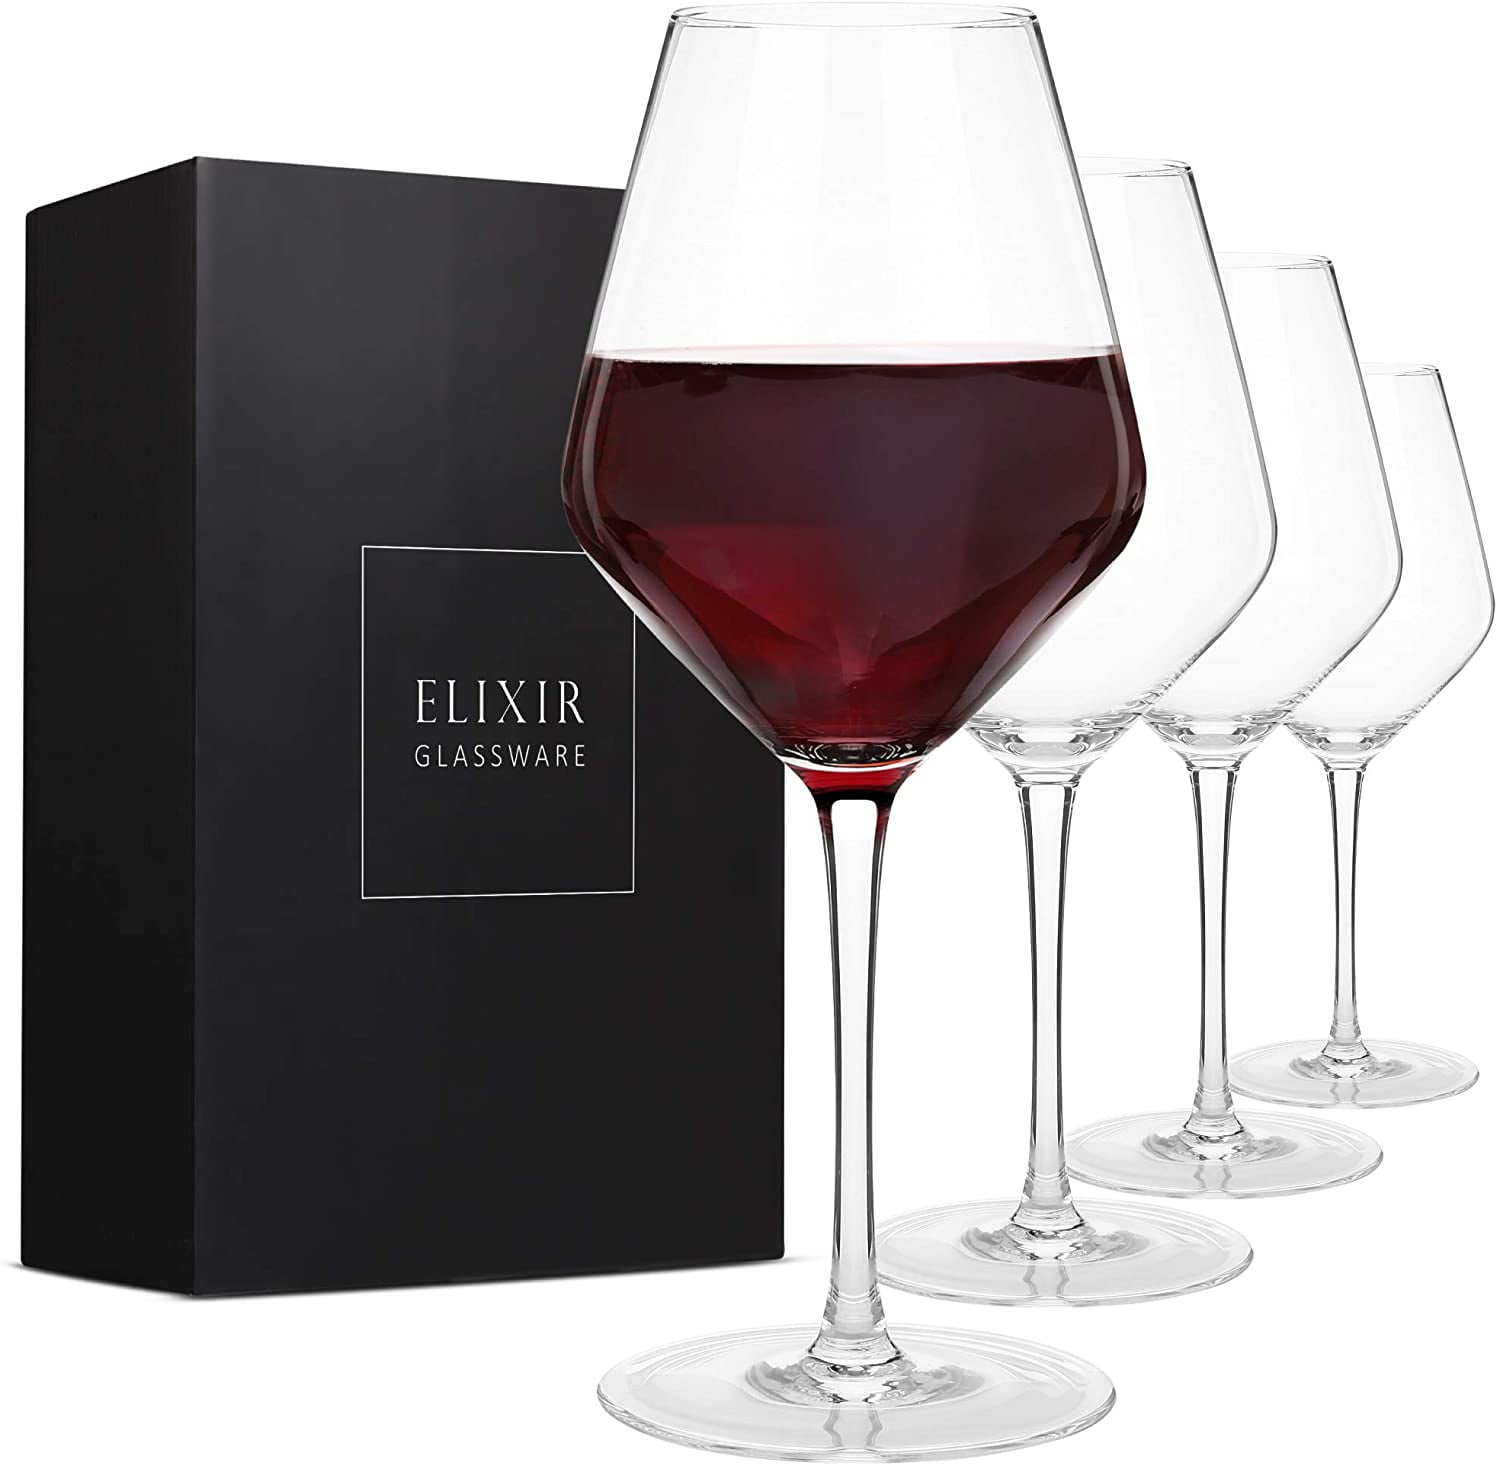 Better Homes & Gardens Clear Flared Red Wine Glass with Stem - 4 Pack